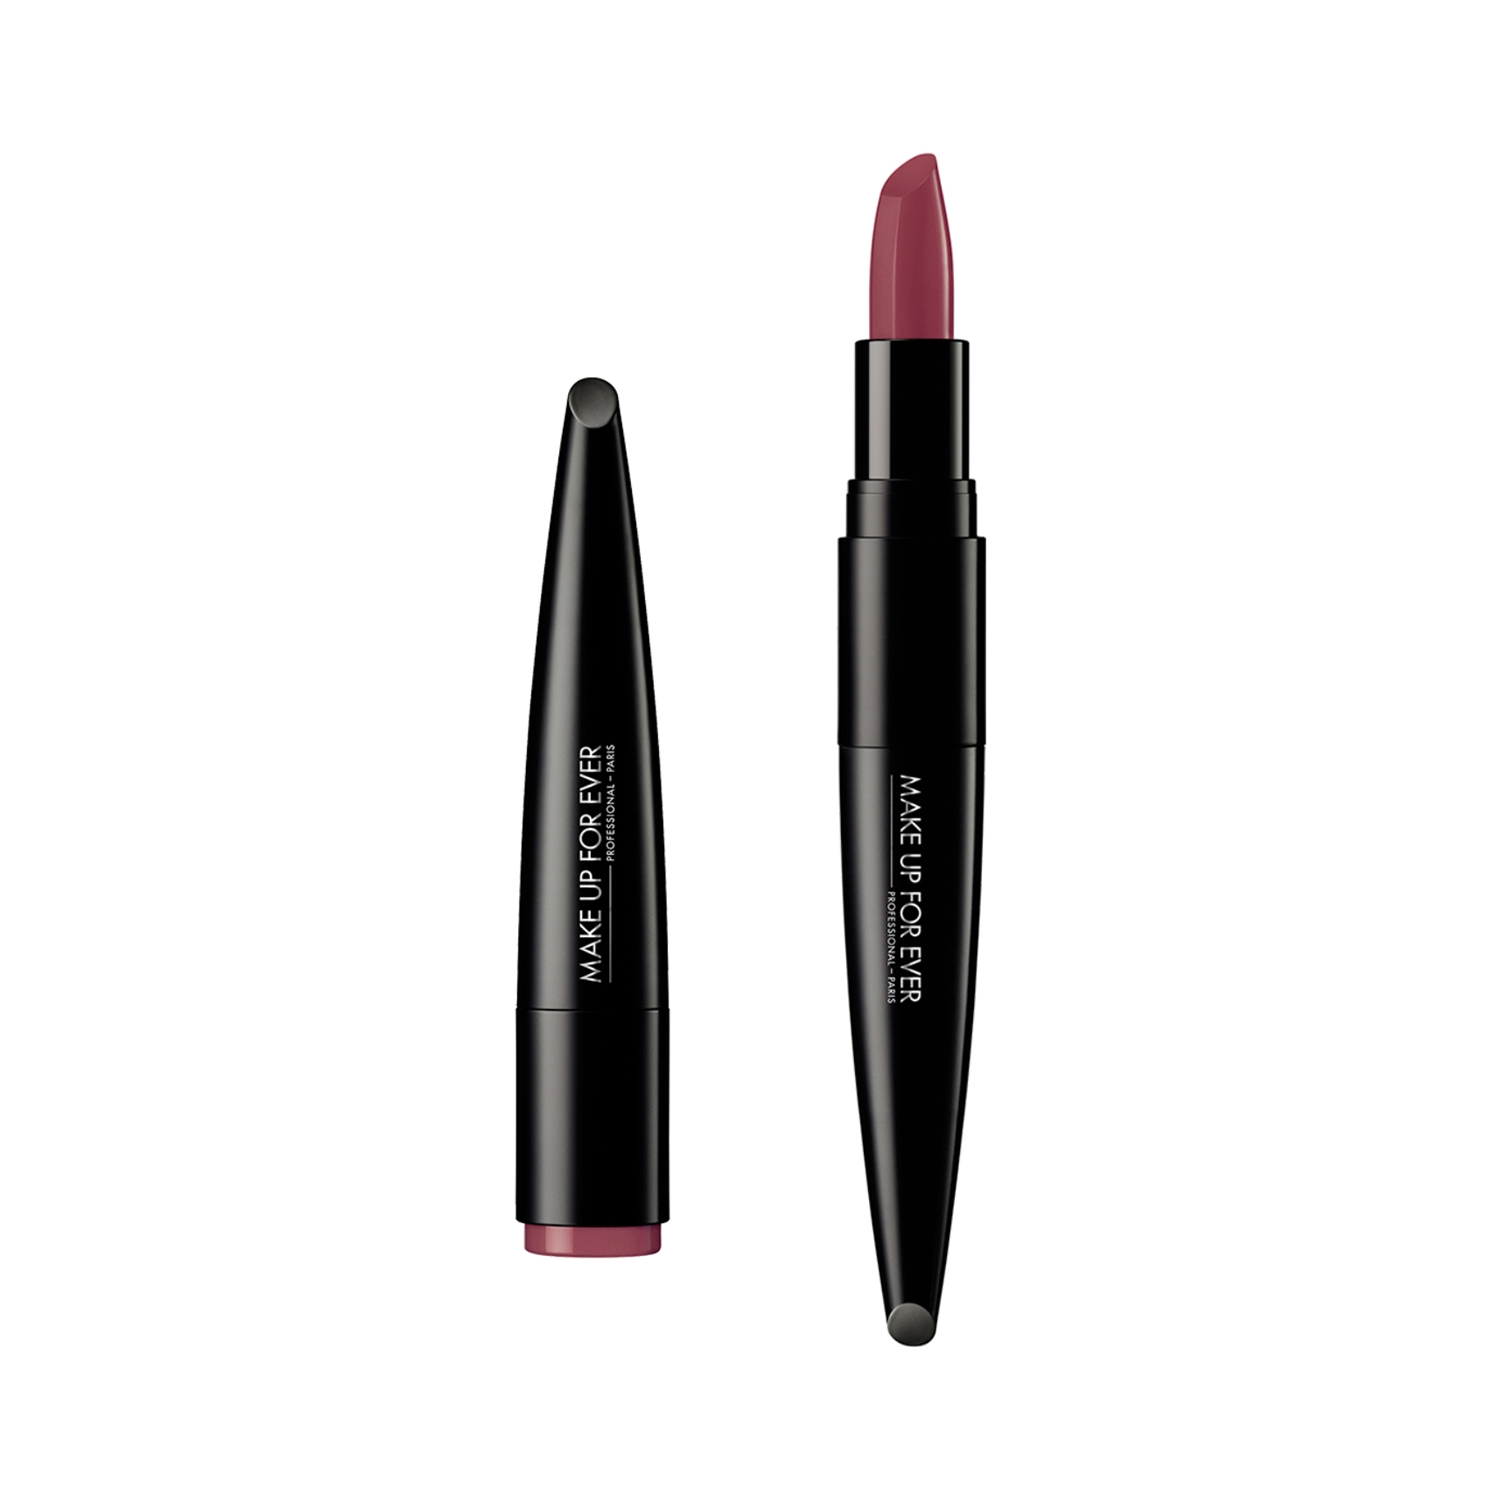 Make Up For Ever | Make Up For Ever Rouge Artist-intense Color Beautifying Lipstick - Upbeat Mauve 172 (3.2g)